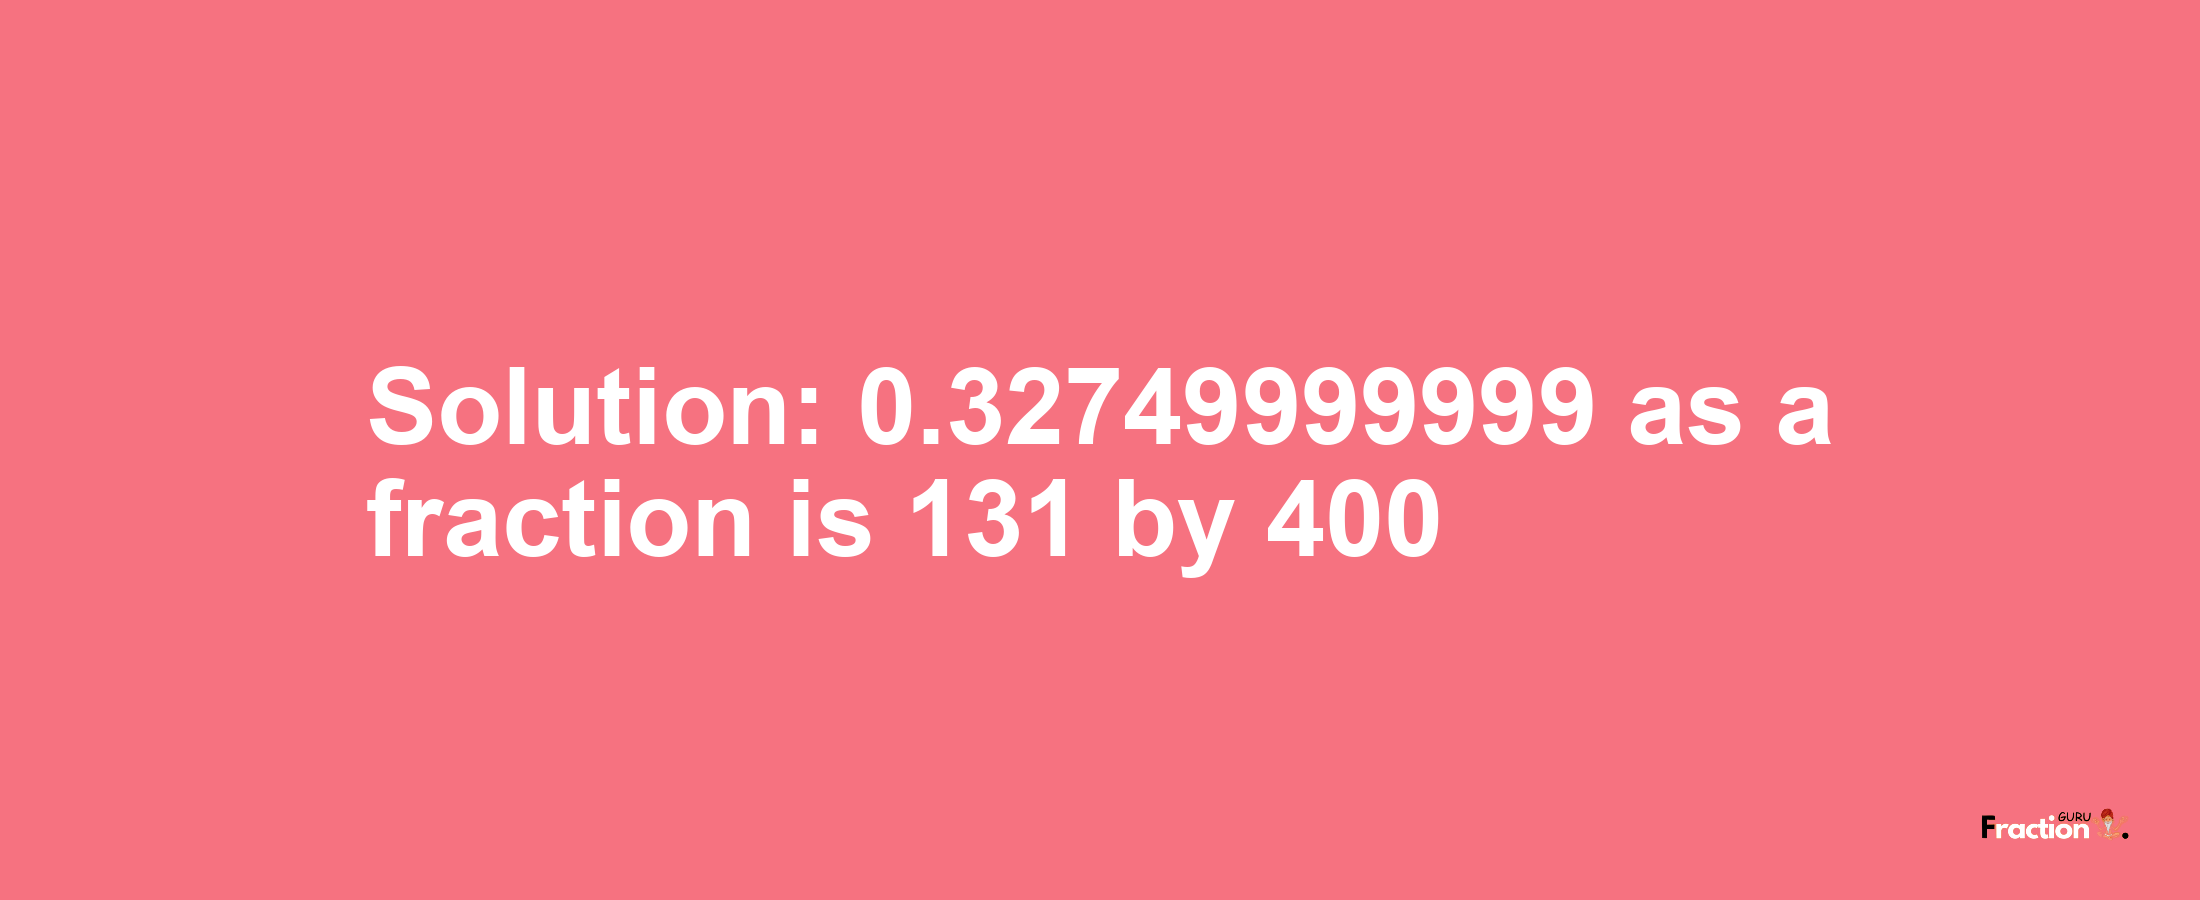 Solution:0.32749999999 as a fraction is 131/400